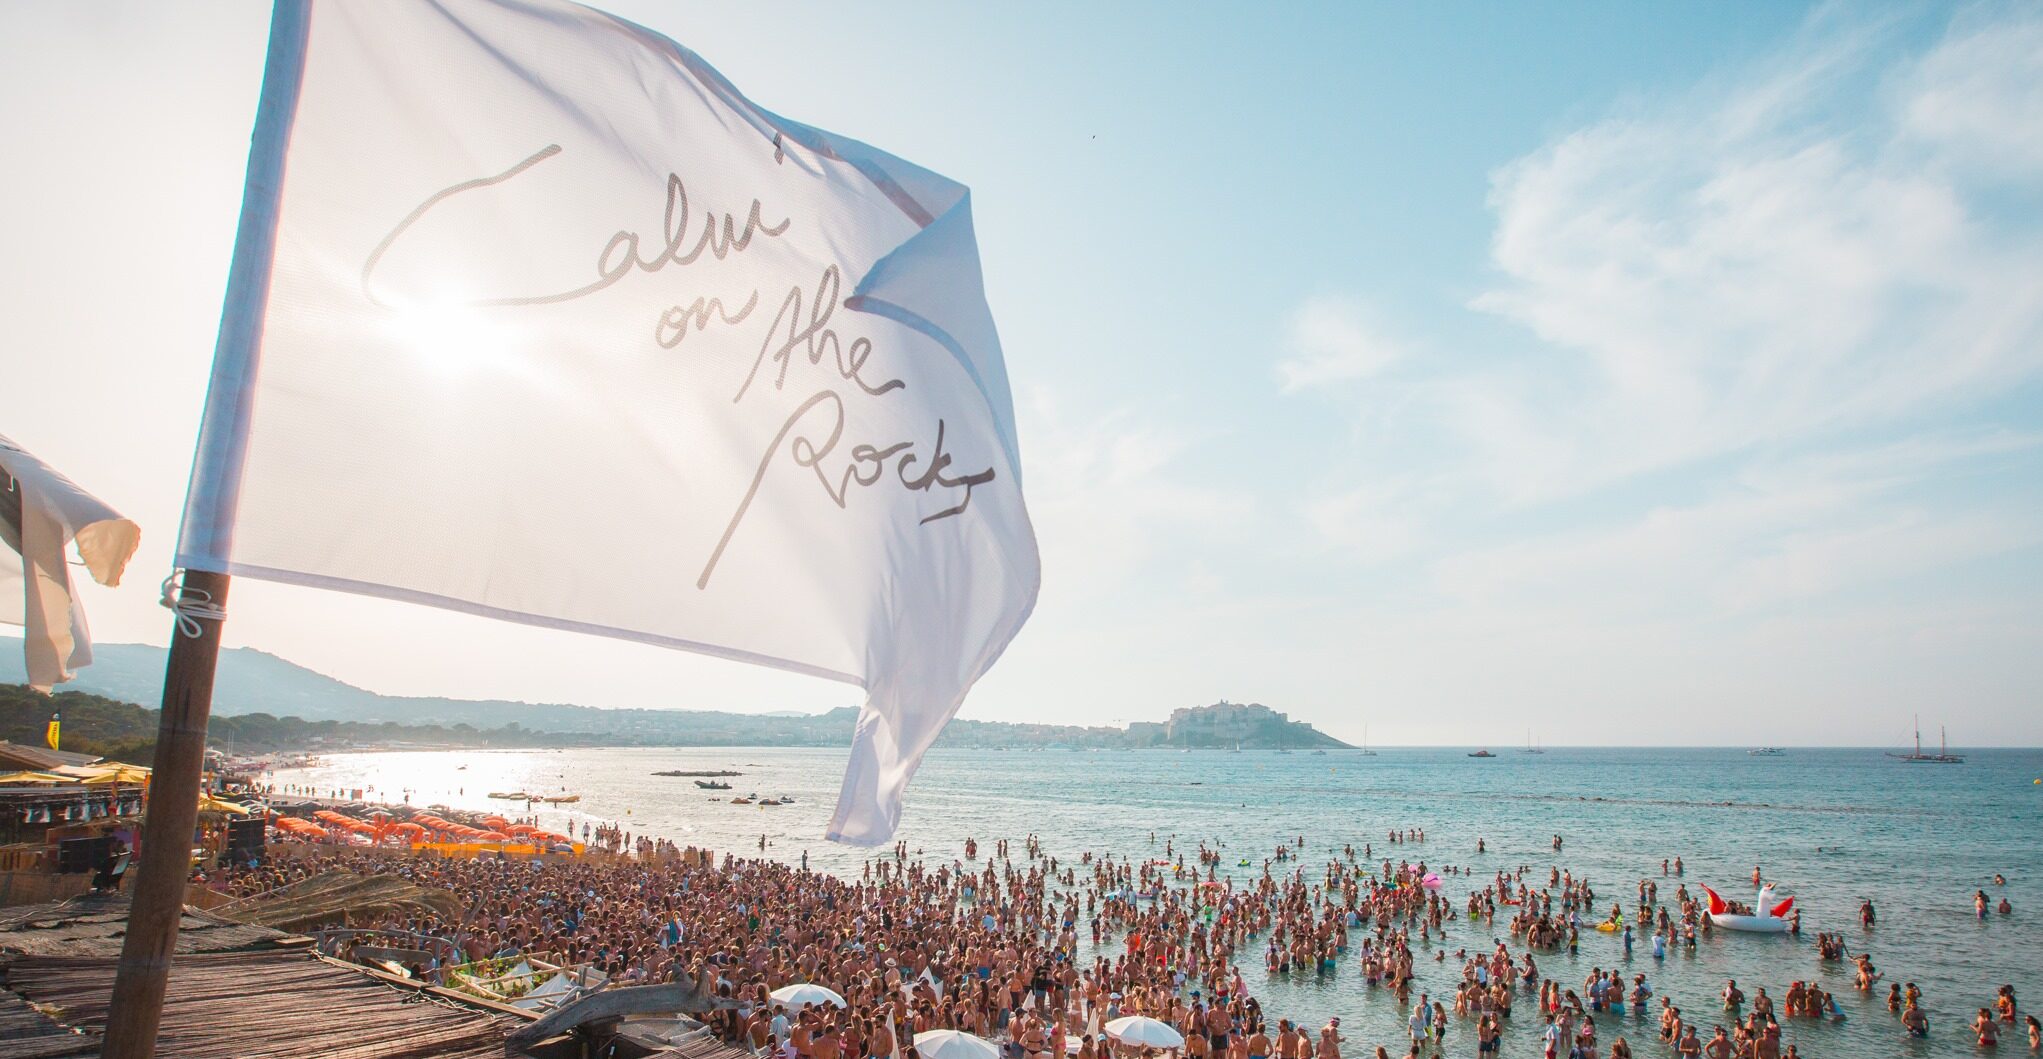 View of Calvi On The Rocks flag waving on the beach with people dancing - credits Calvi On The Rocks - Calvi On The Rocks 2023 - Lineupping.com